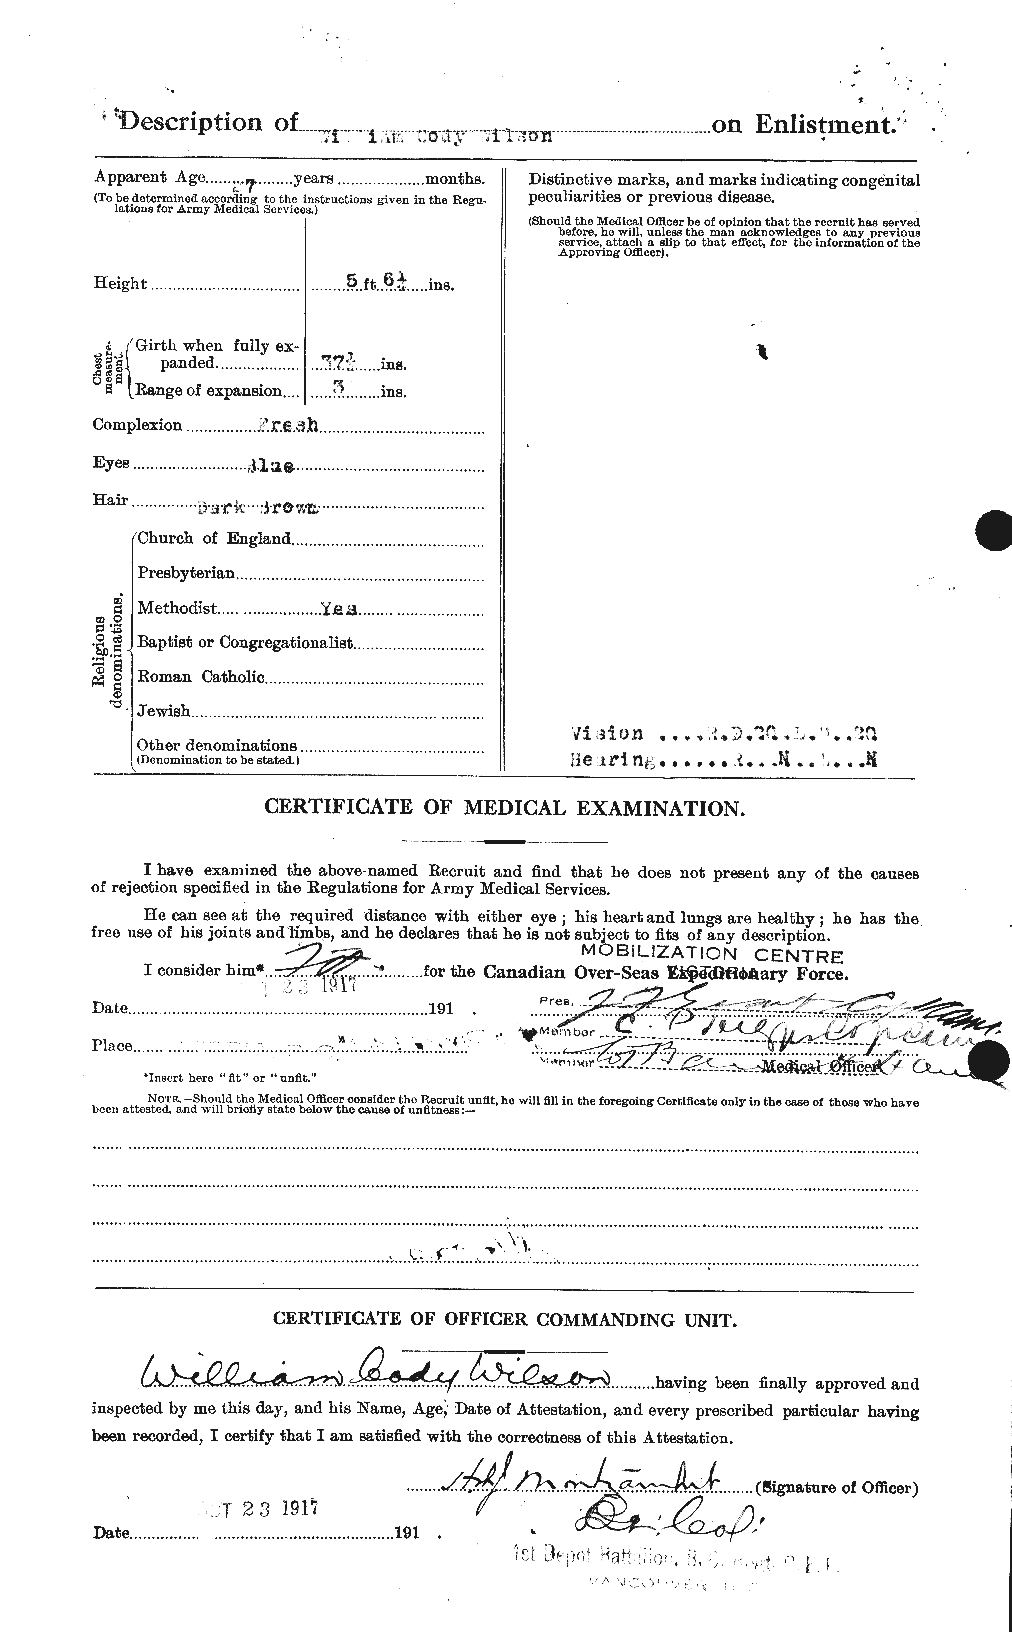 Personnel Records of the First World War - CEF 681957b